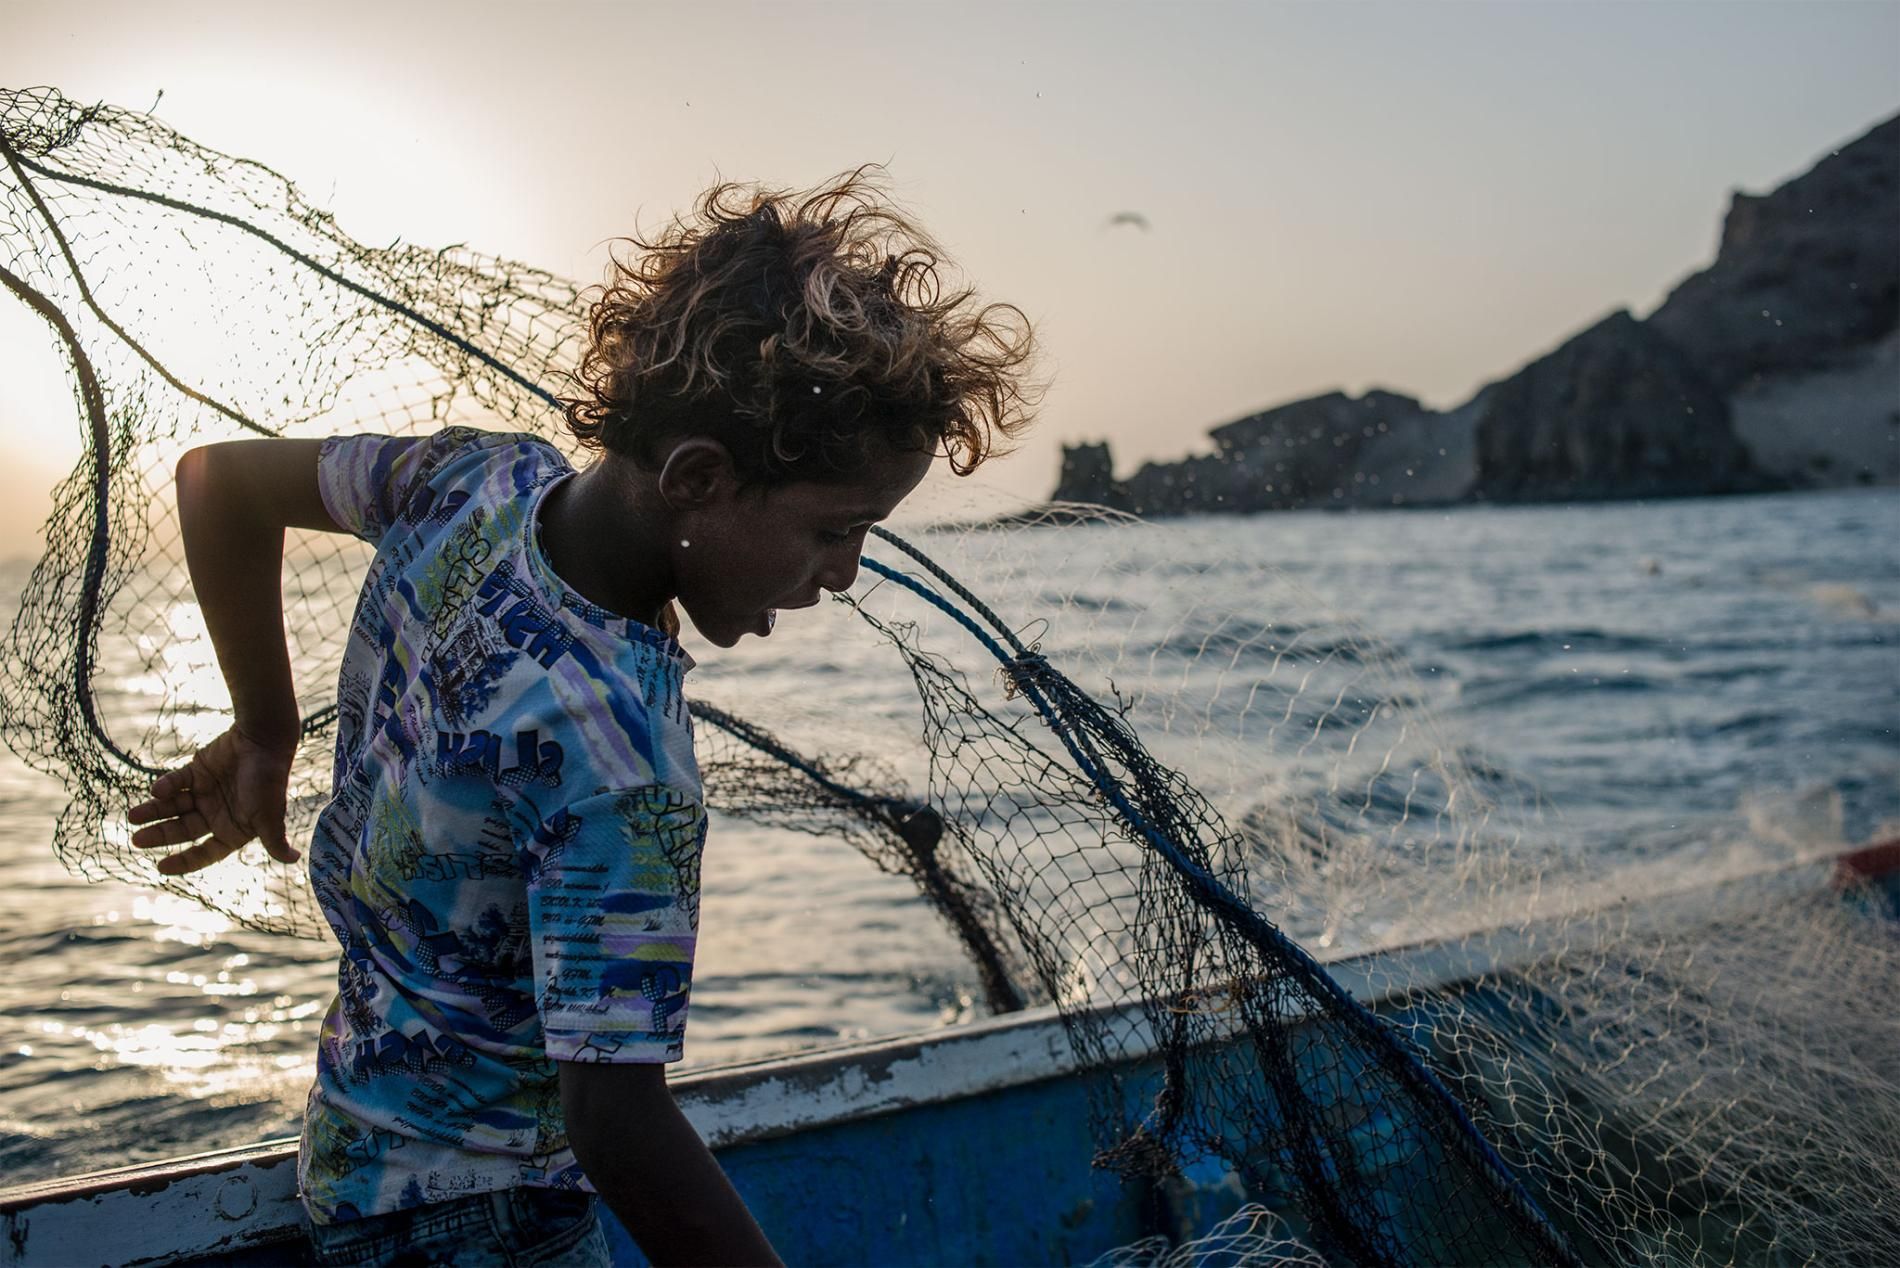 Musa throws a net into the ocean after spotting a school of fish. Image by Alex Potter. Yemen, 2018.